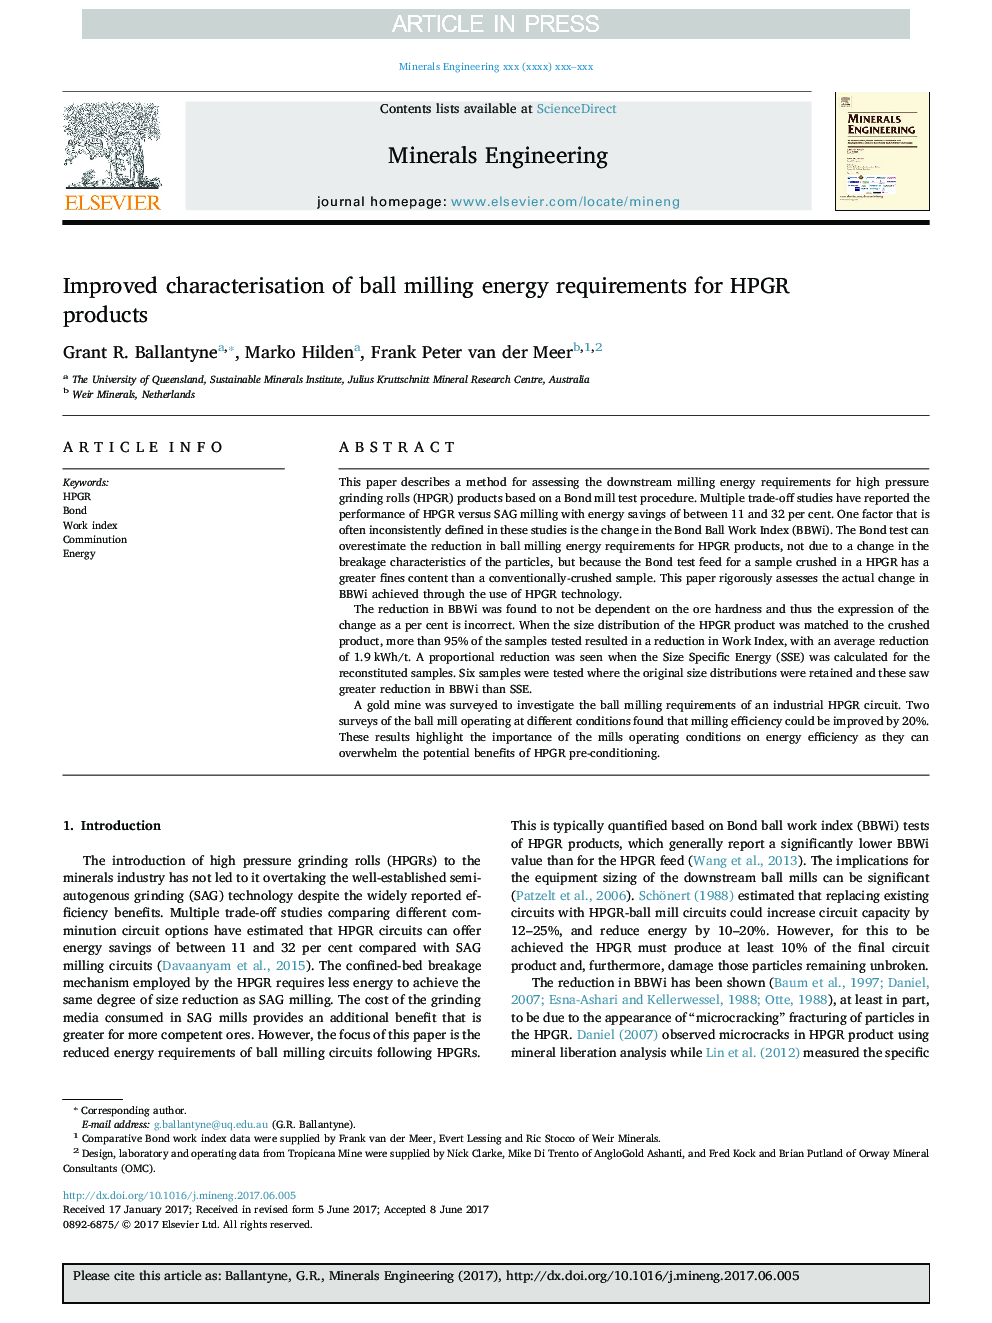 Improved characterisation of ball milling energy requirements for HPGR products